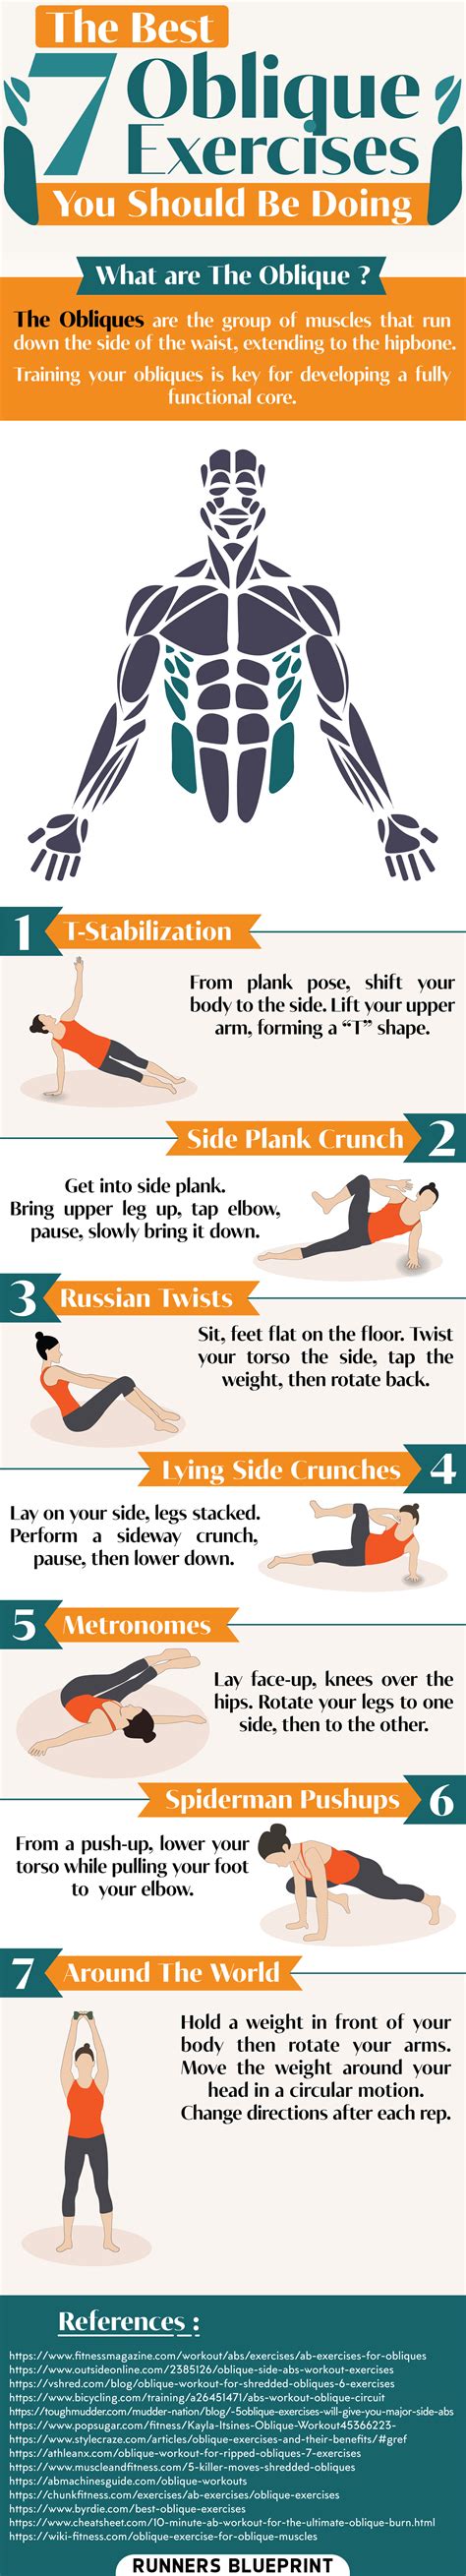 The 7 Best Oblique Exercises A 30 Minute Side Abs Workout Routine